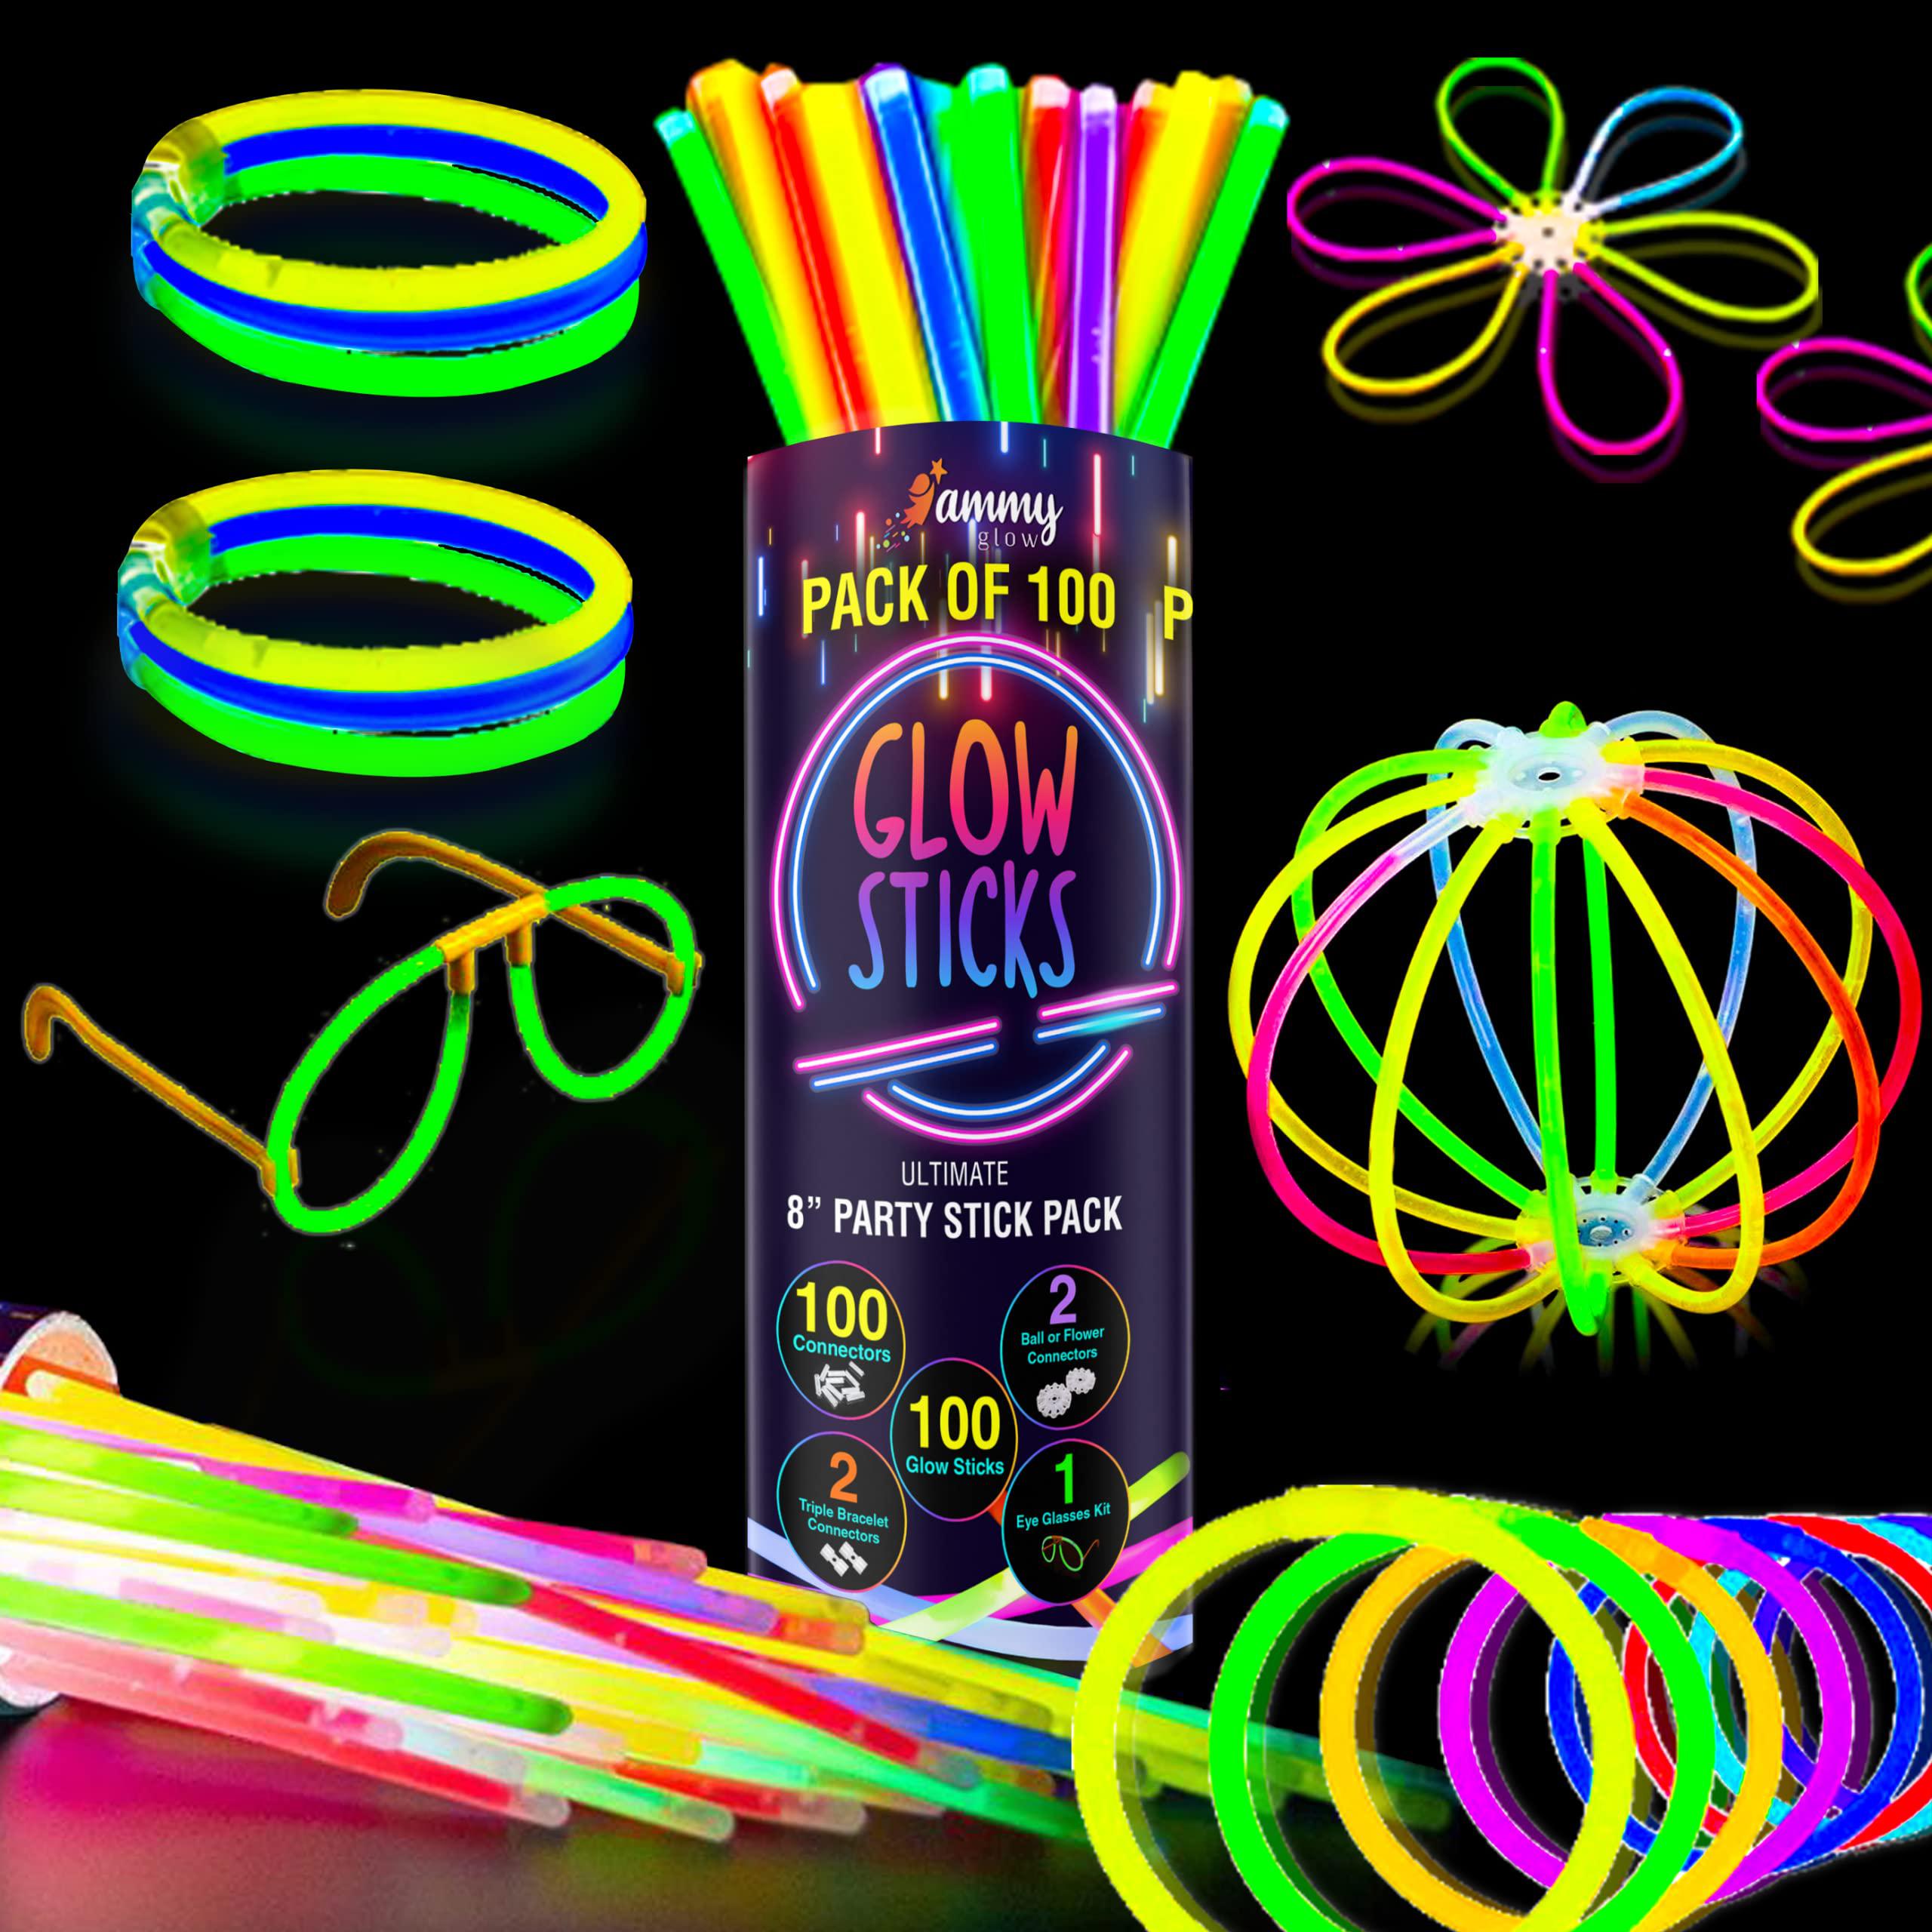 Ammy Glow 100 glow sticks bulk - glow in the dark party supplies with eye  glasses kit-bracelets necklaces and more-12 hours glow party